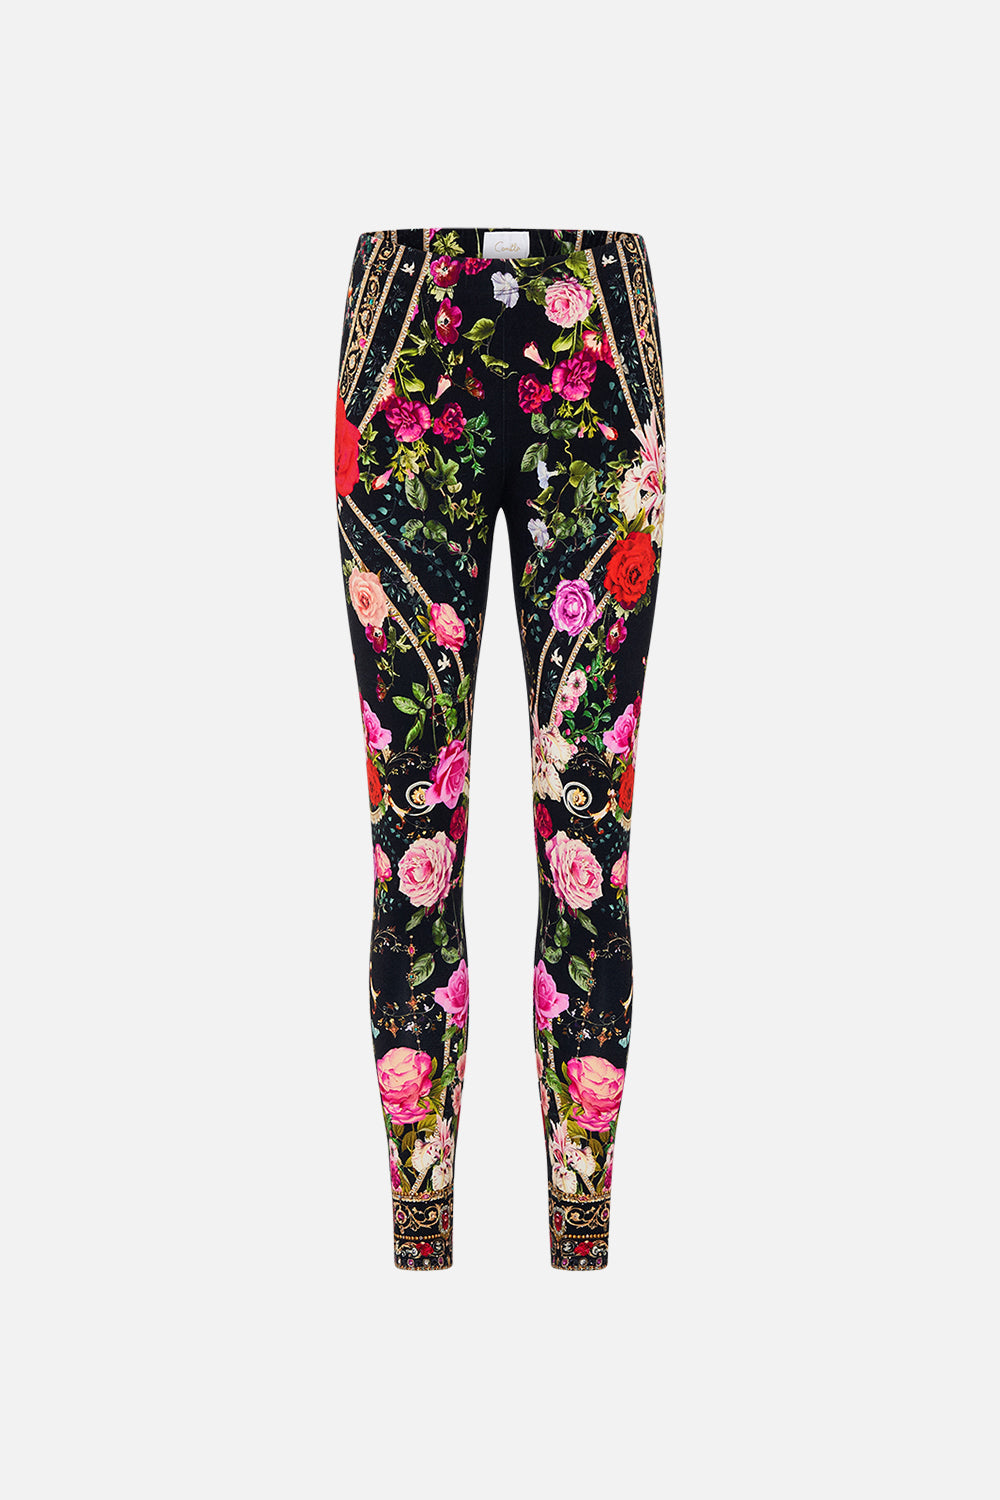 CAMILLA womens leggings in Reservation For Love print